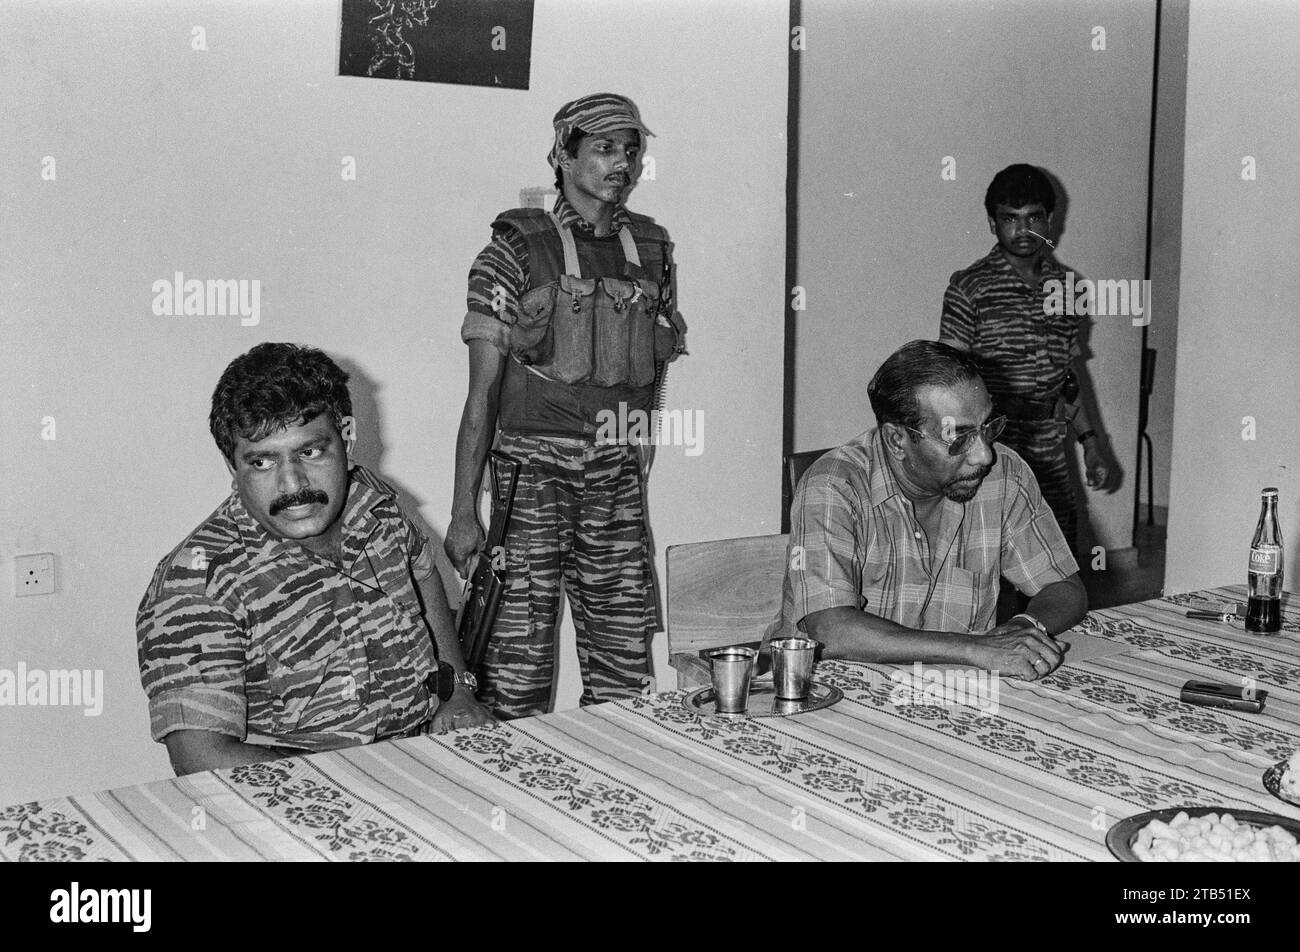 The Liberation Tigers of Tamil Eelam LTTE fought to create an independent Tamil state called Tamil Eelam in the northeast of the island, due to the continuous discrimination and violent persecution against Sri Lankan Tamils by the Sinhalese-dominated Sri Lankan Government. Leader Velupillai Prabhakaran cited violent incidents of the 1958 anti-Tamil pogrom during his childhood that led him to militancy. In 1975, he assassinated the Mayor of Jaffna Alfred Duraiappah in revenge for the 1974 Tamil conference incident. The LTTE was founded in 1976 as a reaction to the Sri Lankan Constitution 1972 Stock Photo